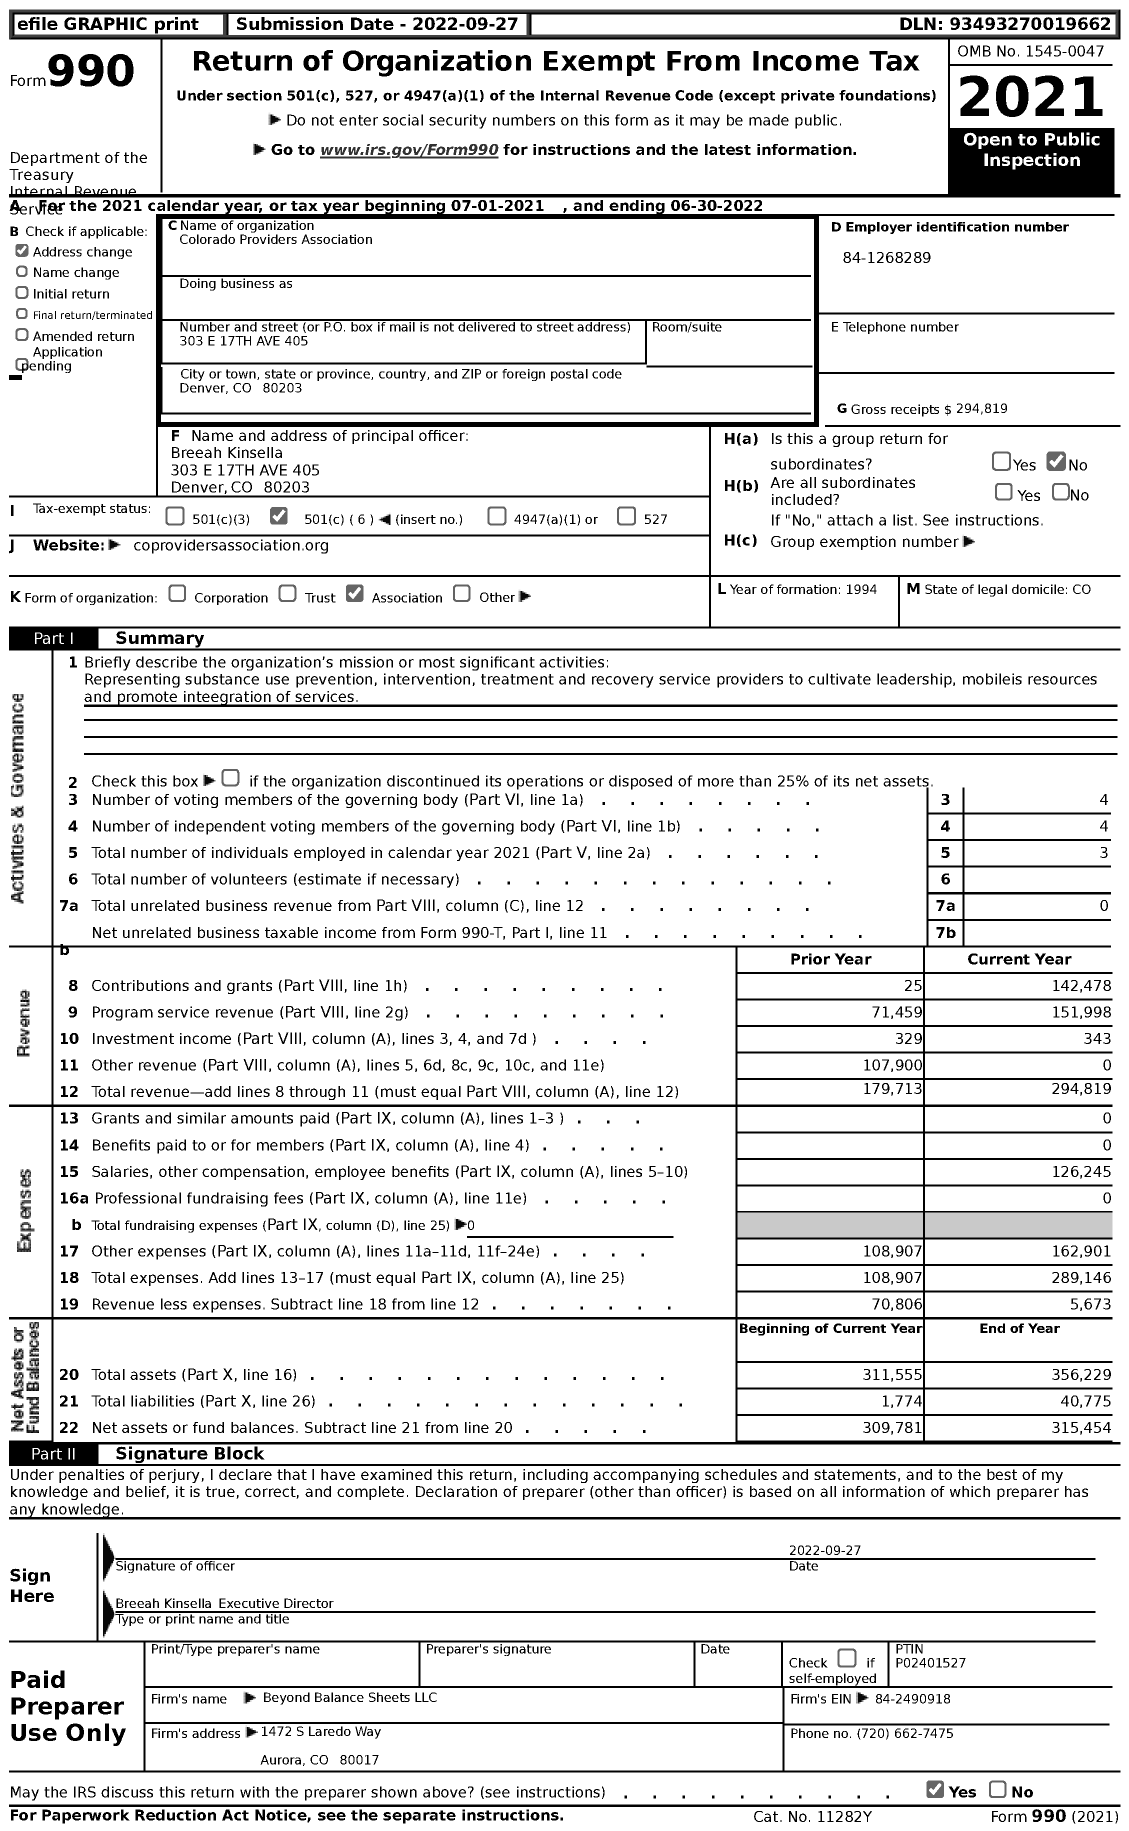 Image of first page of 2021 Form 990 for Colorado Providers Association